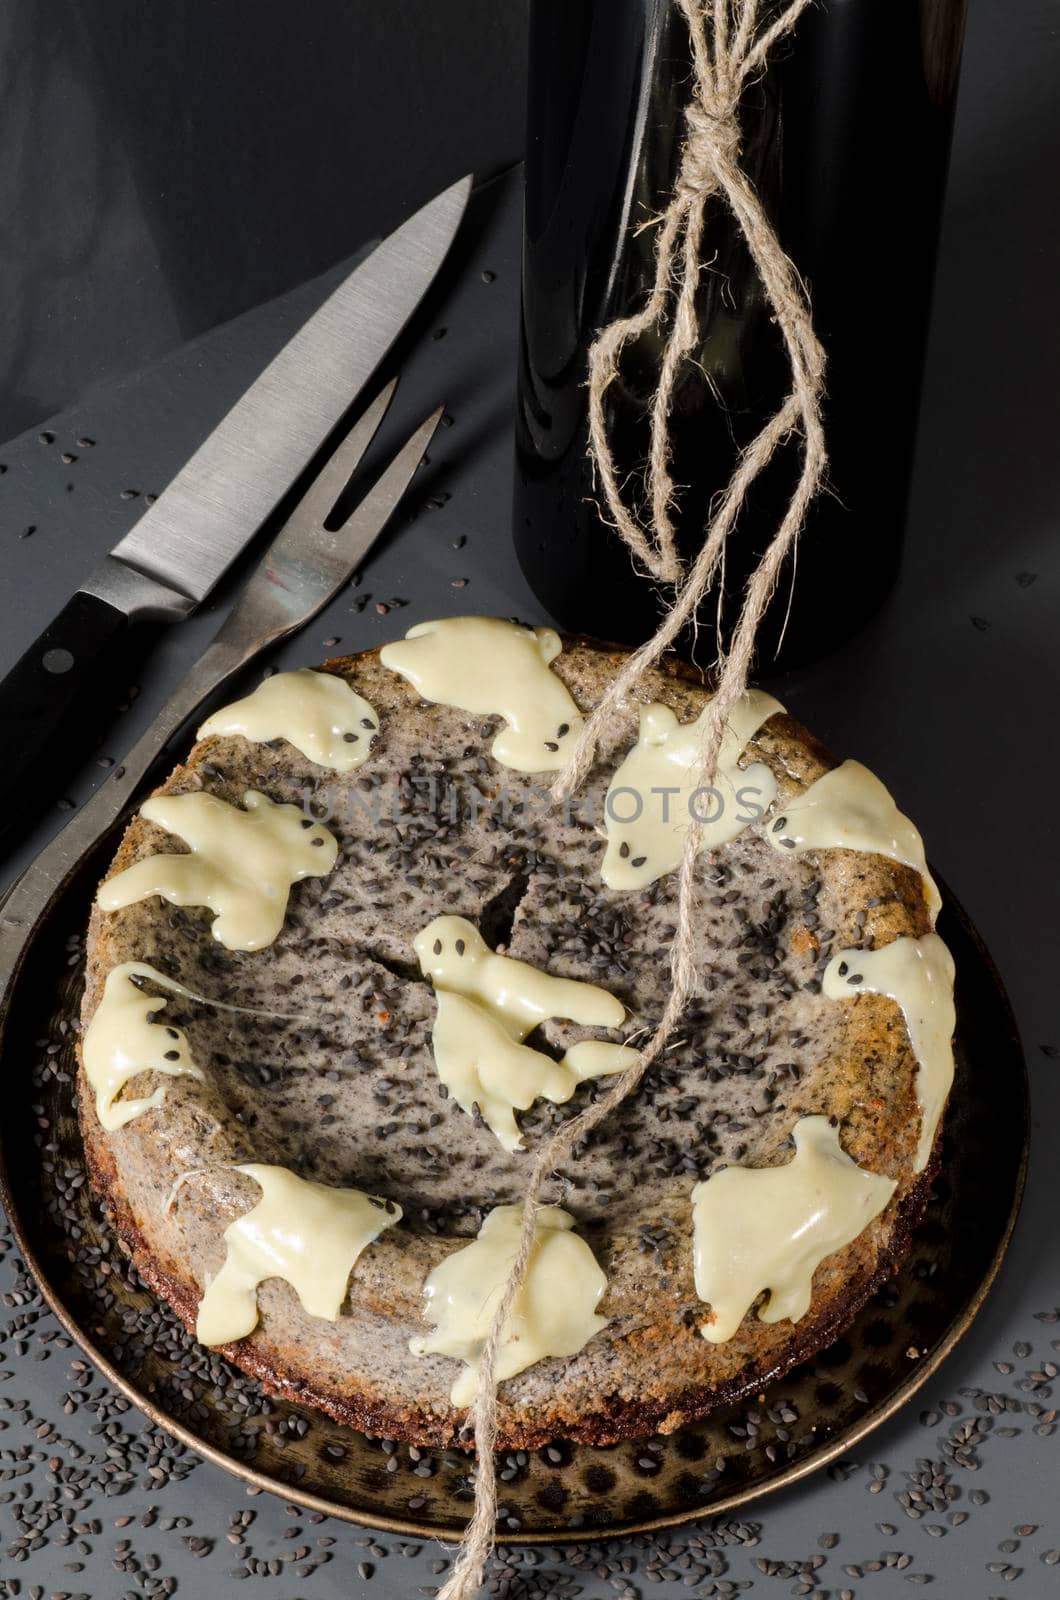 Cheesecake with black sesame seeds on Halloween. From the series "Cheesecake for the holiday"